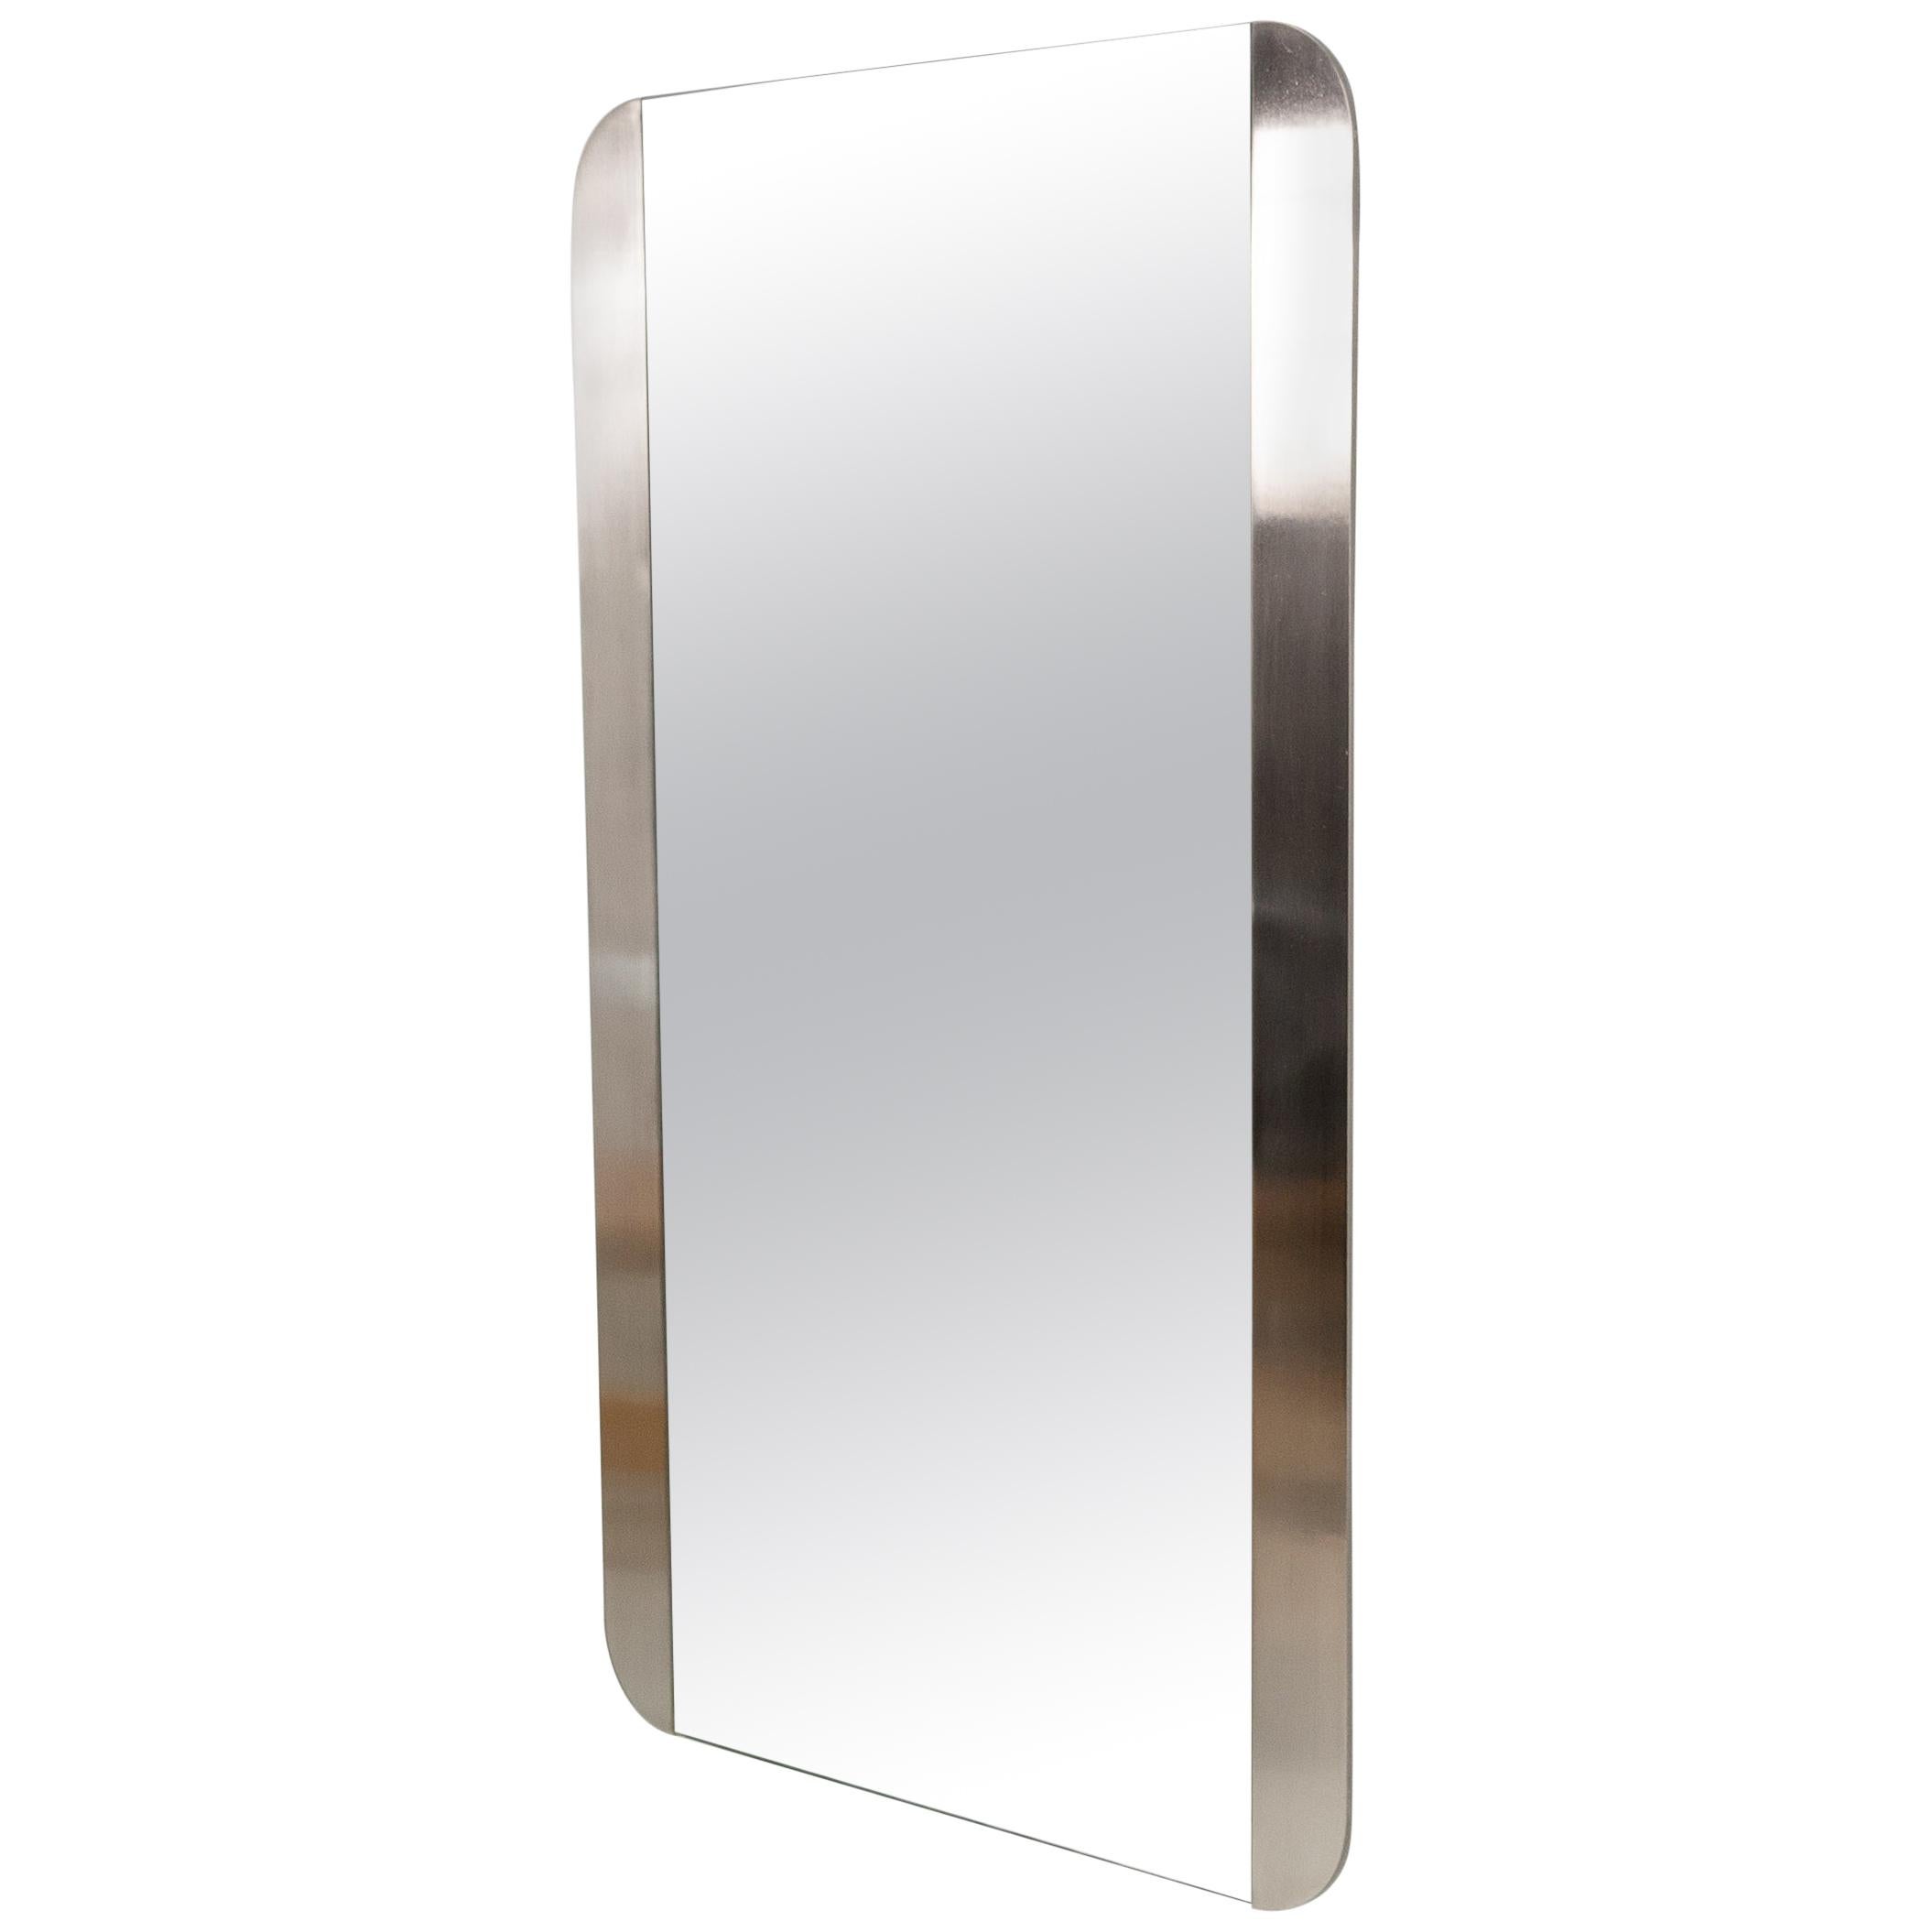 Mirror with Brushed Aluminum Frame, 1970s